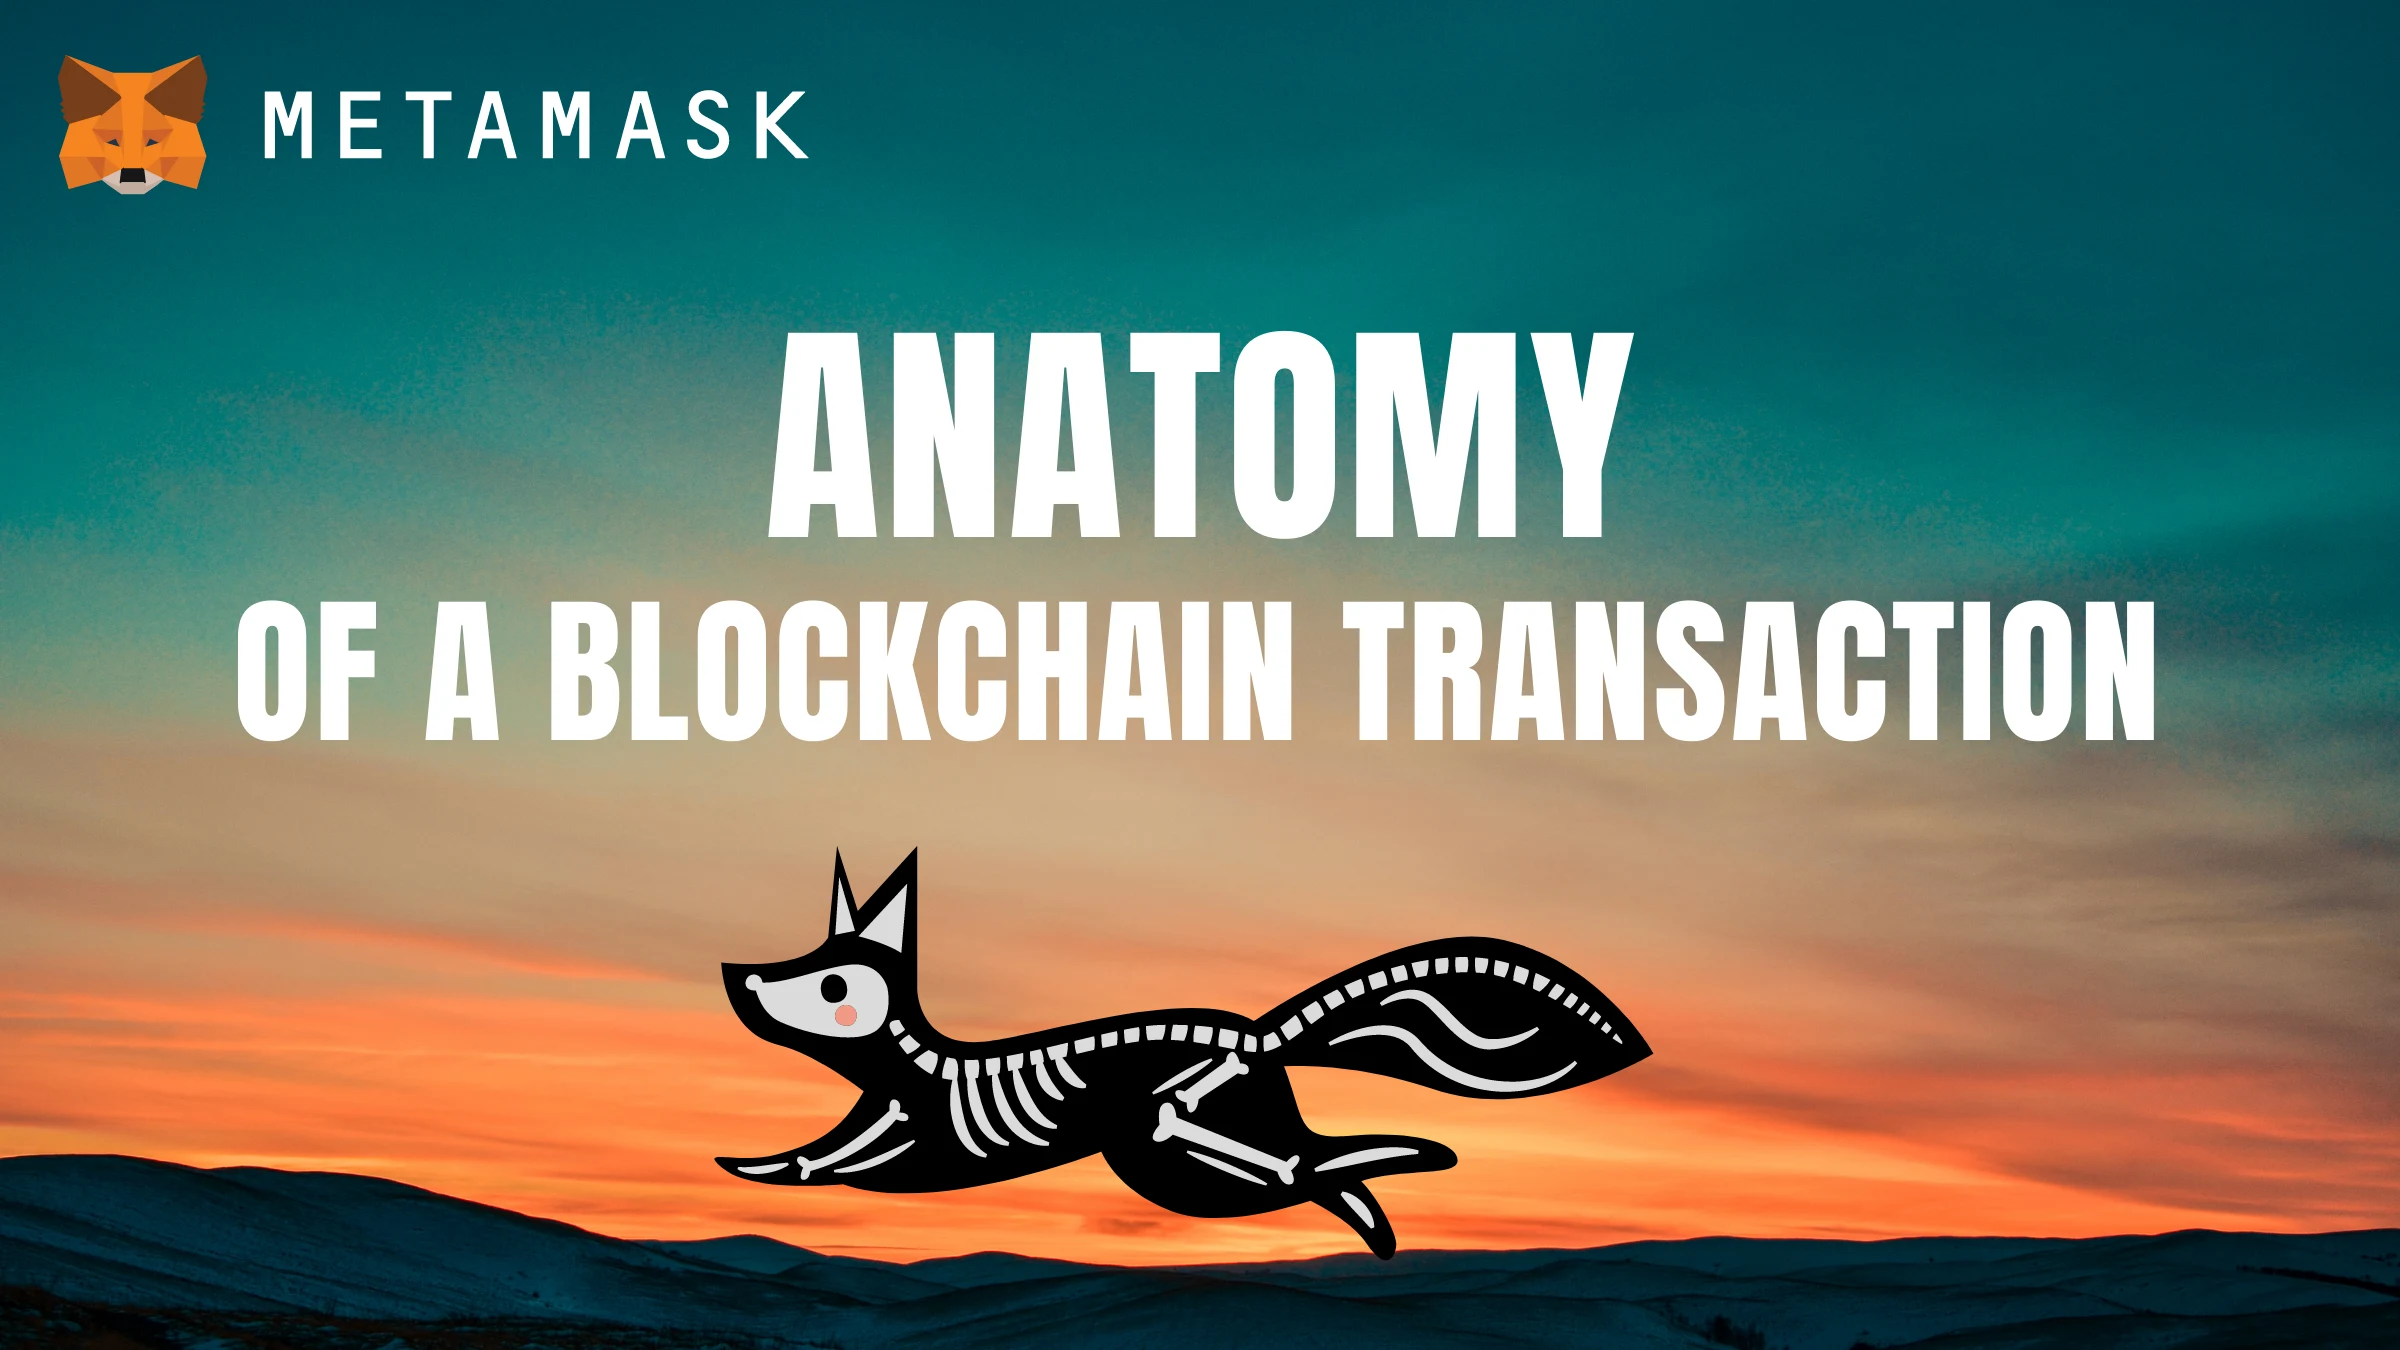 Image: What's the Anatomy of a Blockchain Transaction?